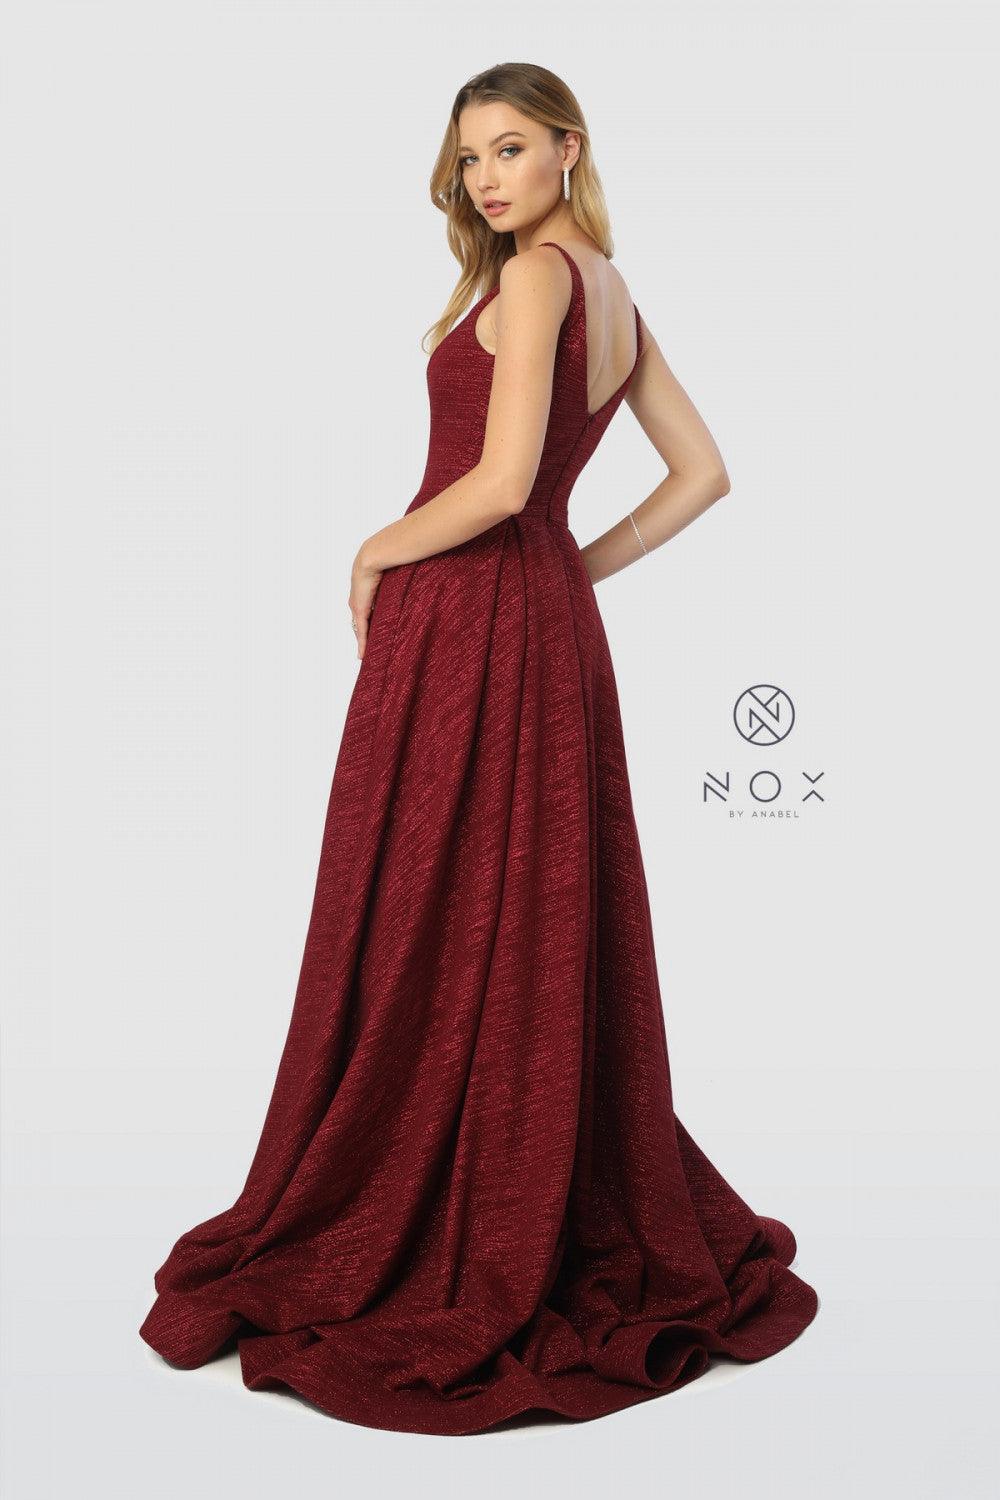 Long Formal Evening Gown Prom Dress with Pockets - The Dress Outlet Nox Anabel